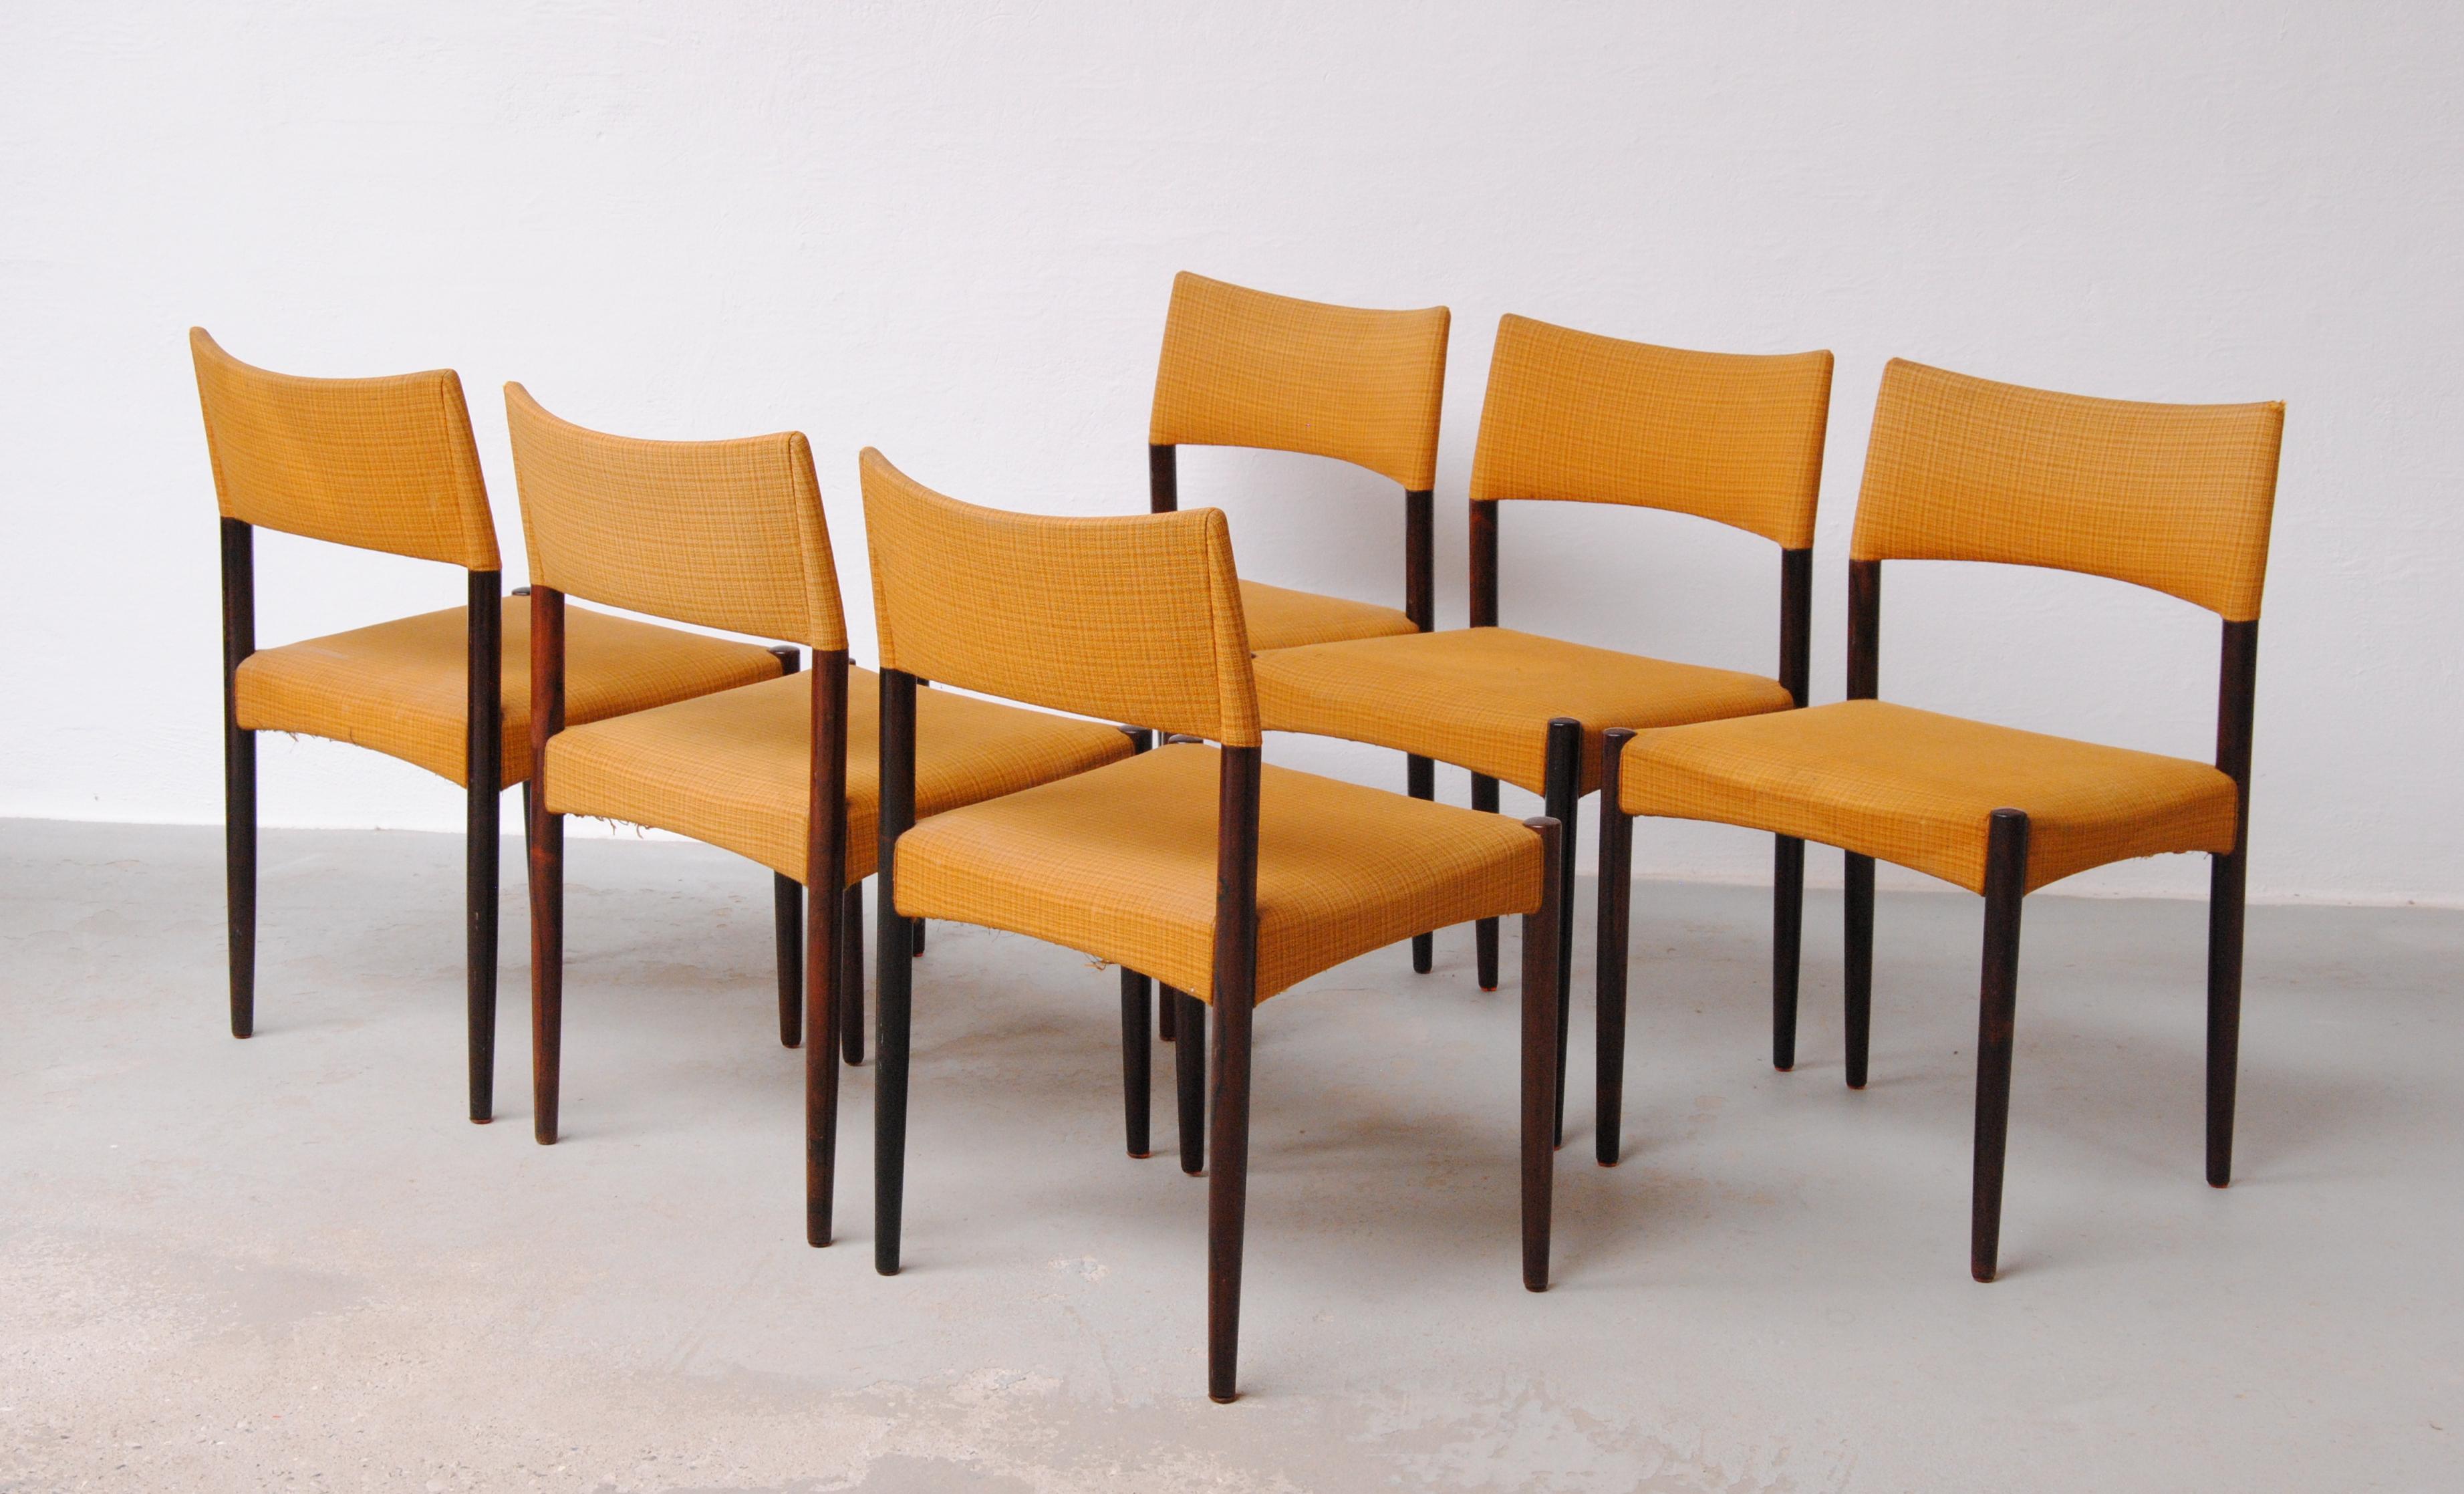 Set of Six Restored Rosewood Ejnar Larsen and Axel Bender Madsen Dining Chairs by Willy Beck

The dining chairs feature a modest yet sophisticated design with their squared seat and what at first appeares as straight lined design that at a closer